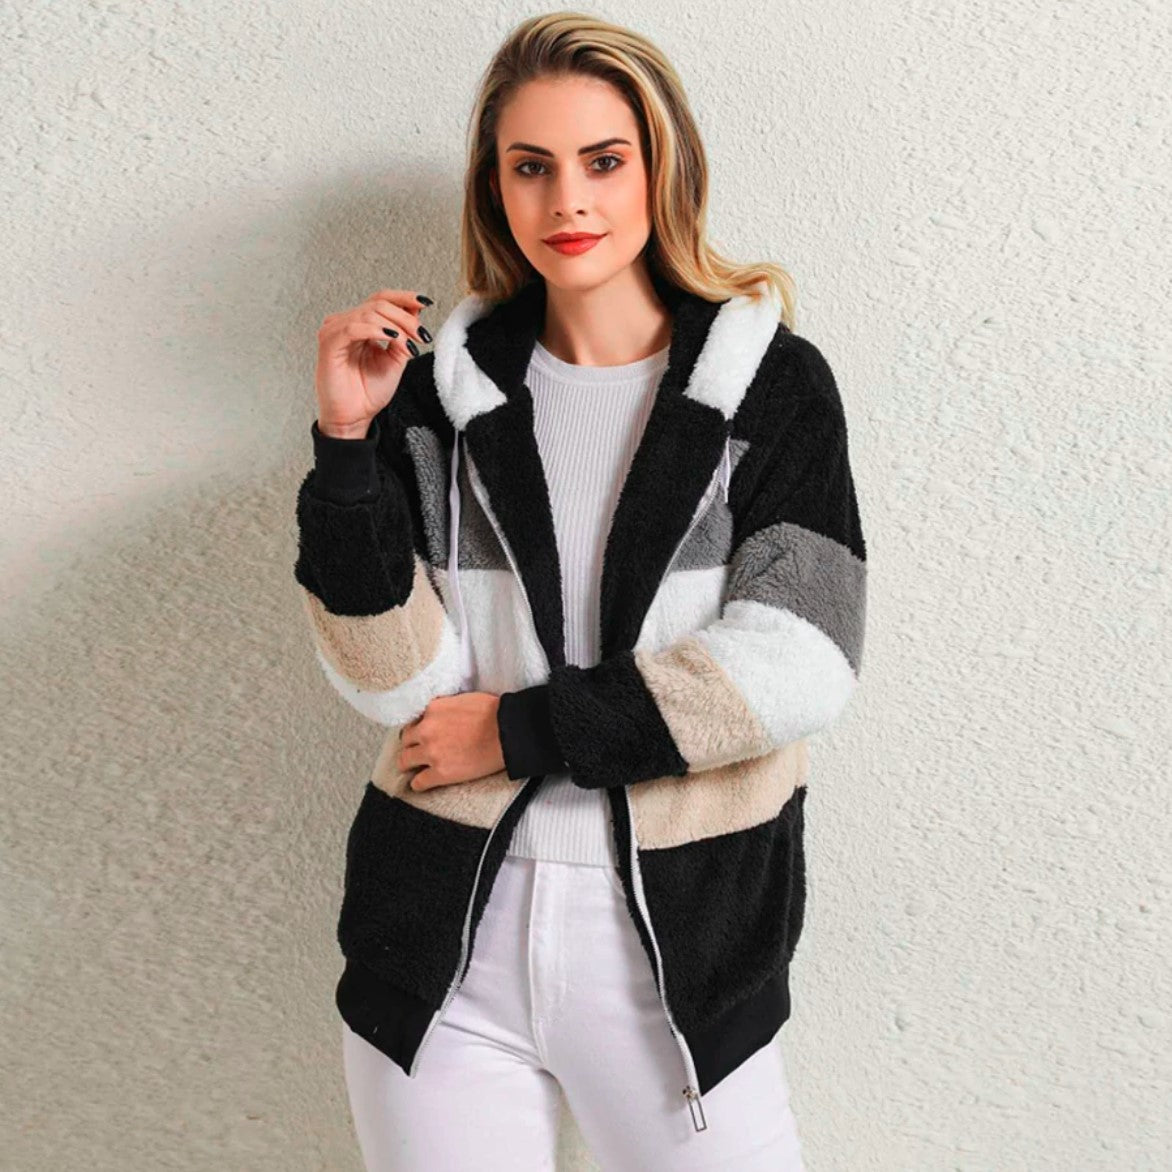 Women's Loose, Warm and Plush Hooded Jacket for Winter